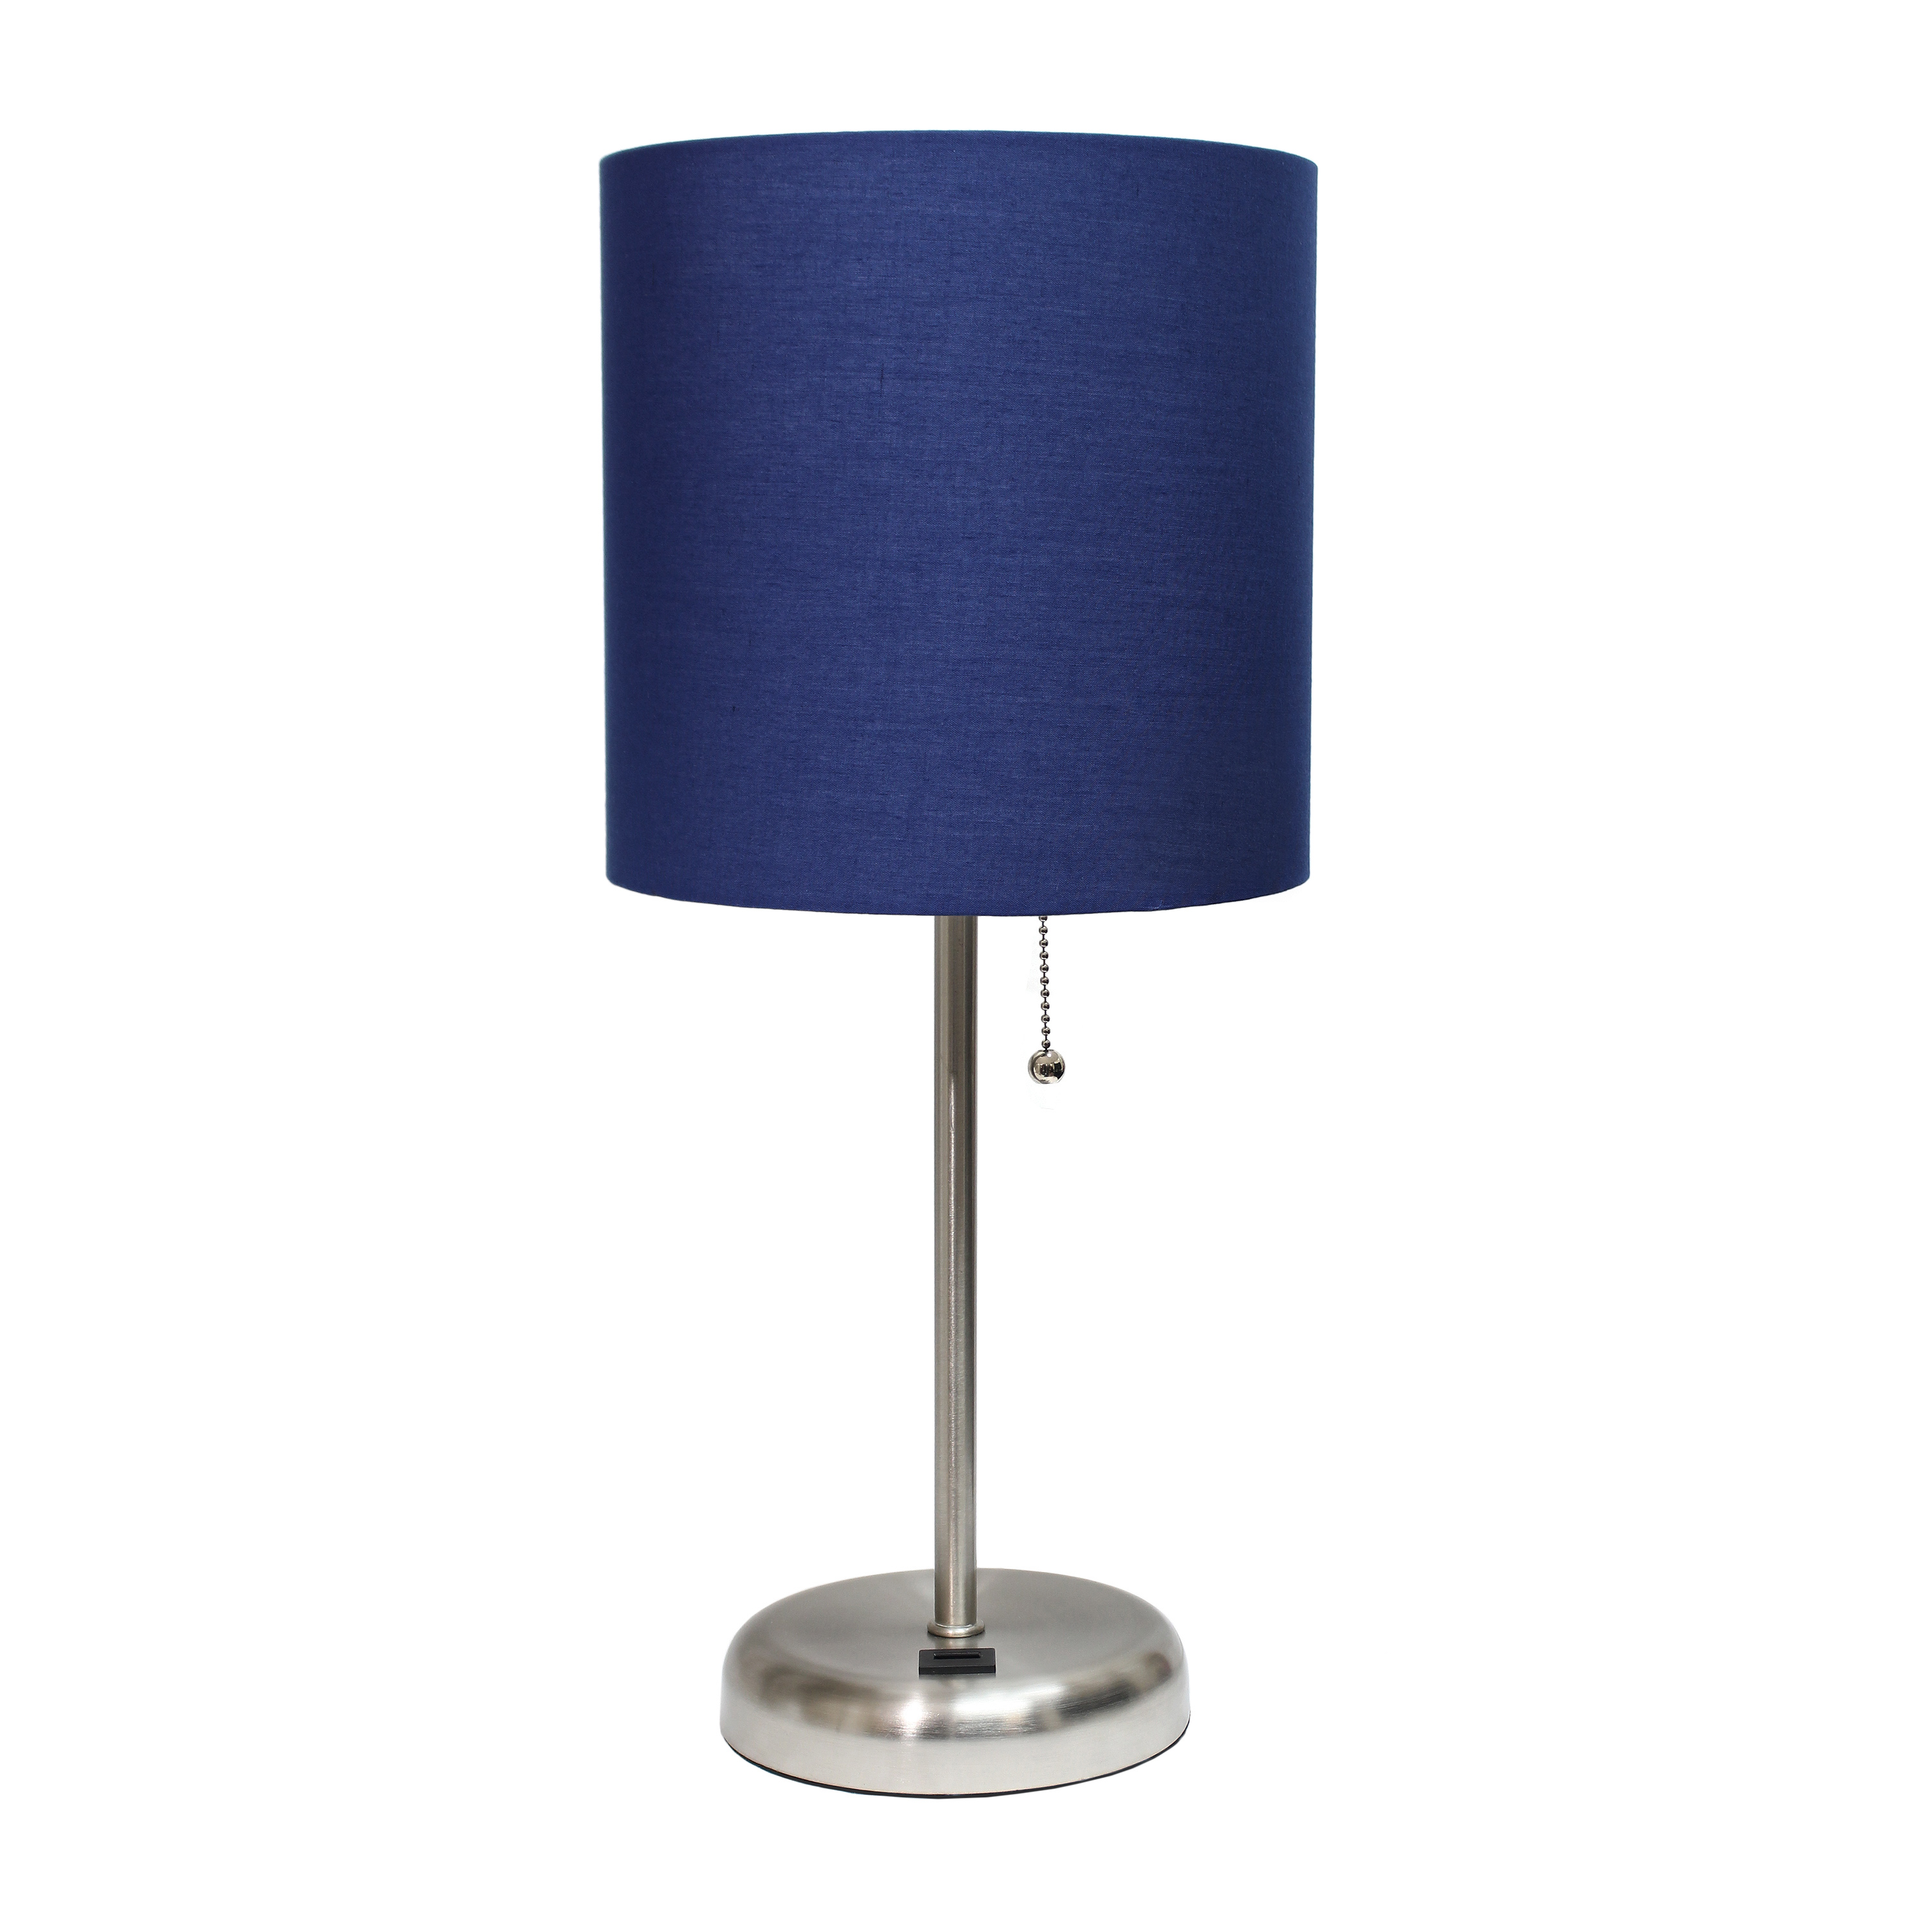 LimeLights Stick Lamp with USB charging port and Fabric Shade, Navy 